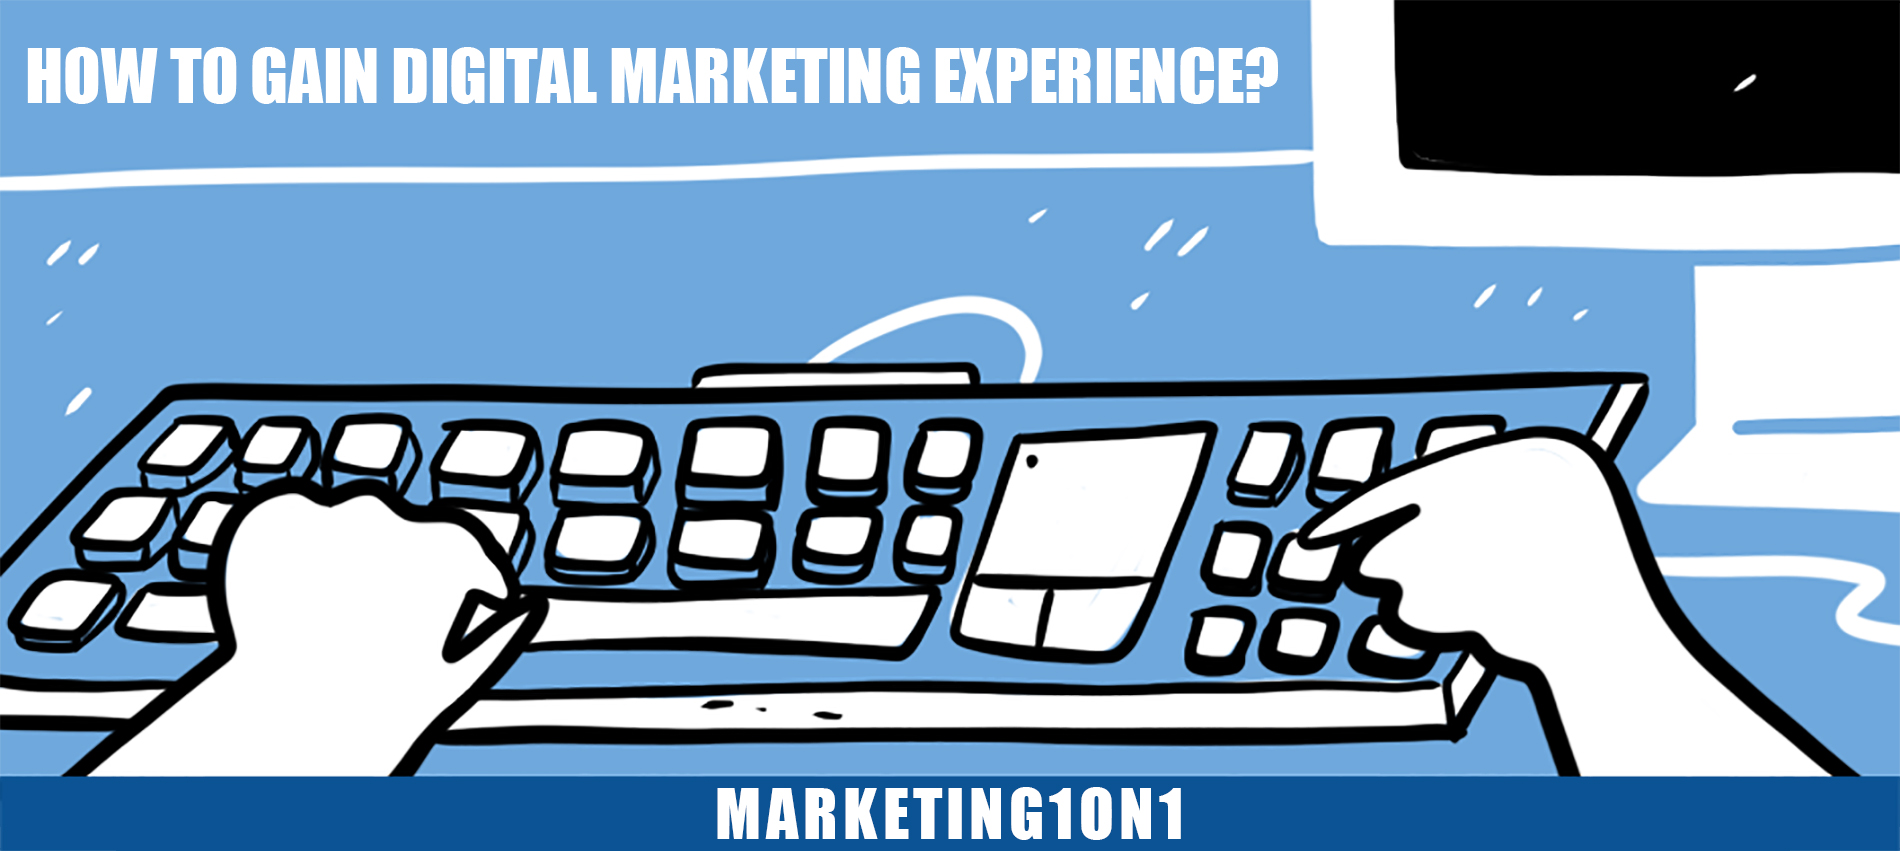 How to gain digital marketing experience?